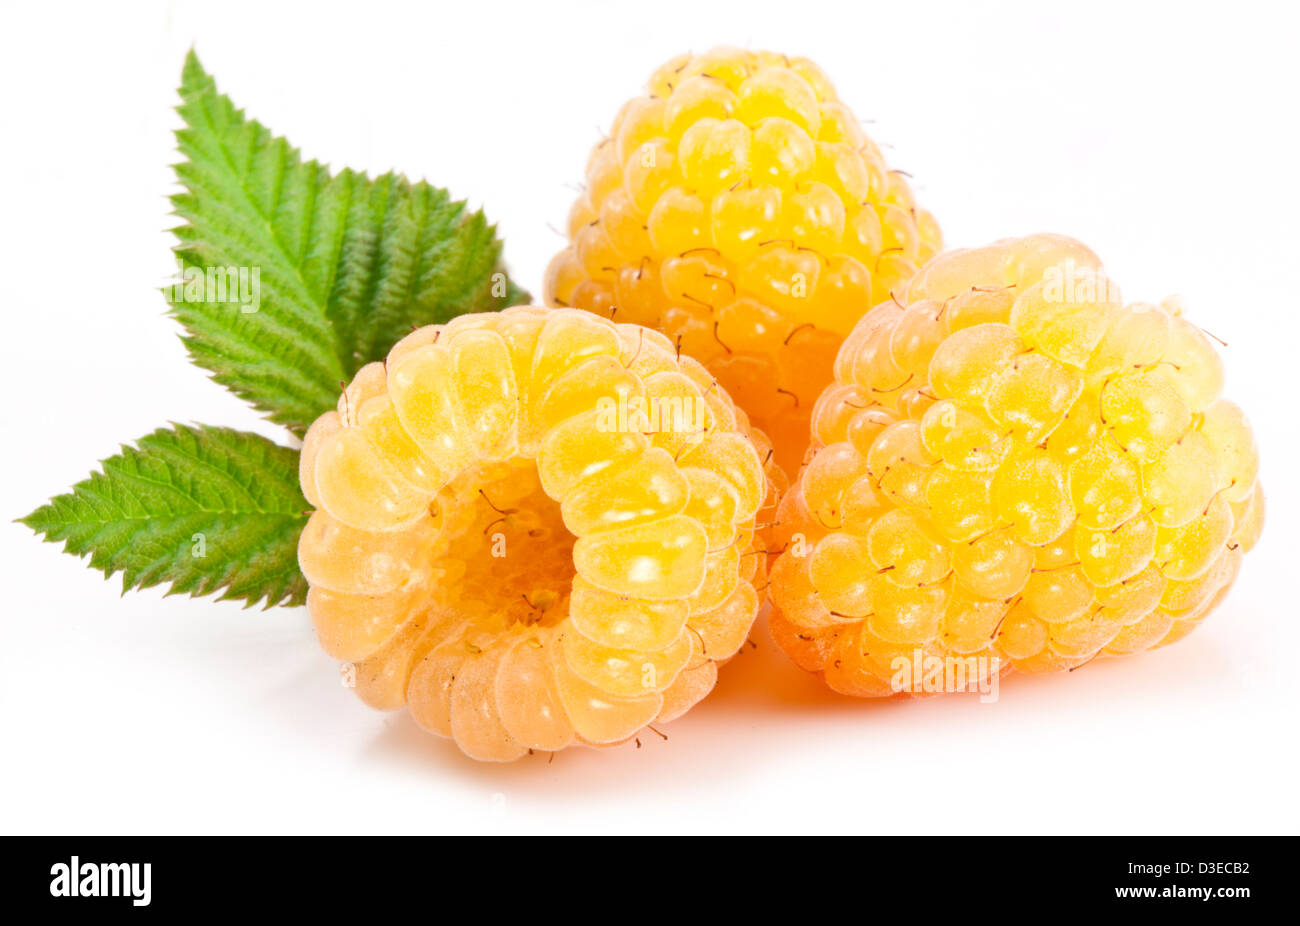 Yellow raspberries isolated on a white background. Stock Photo